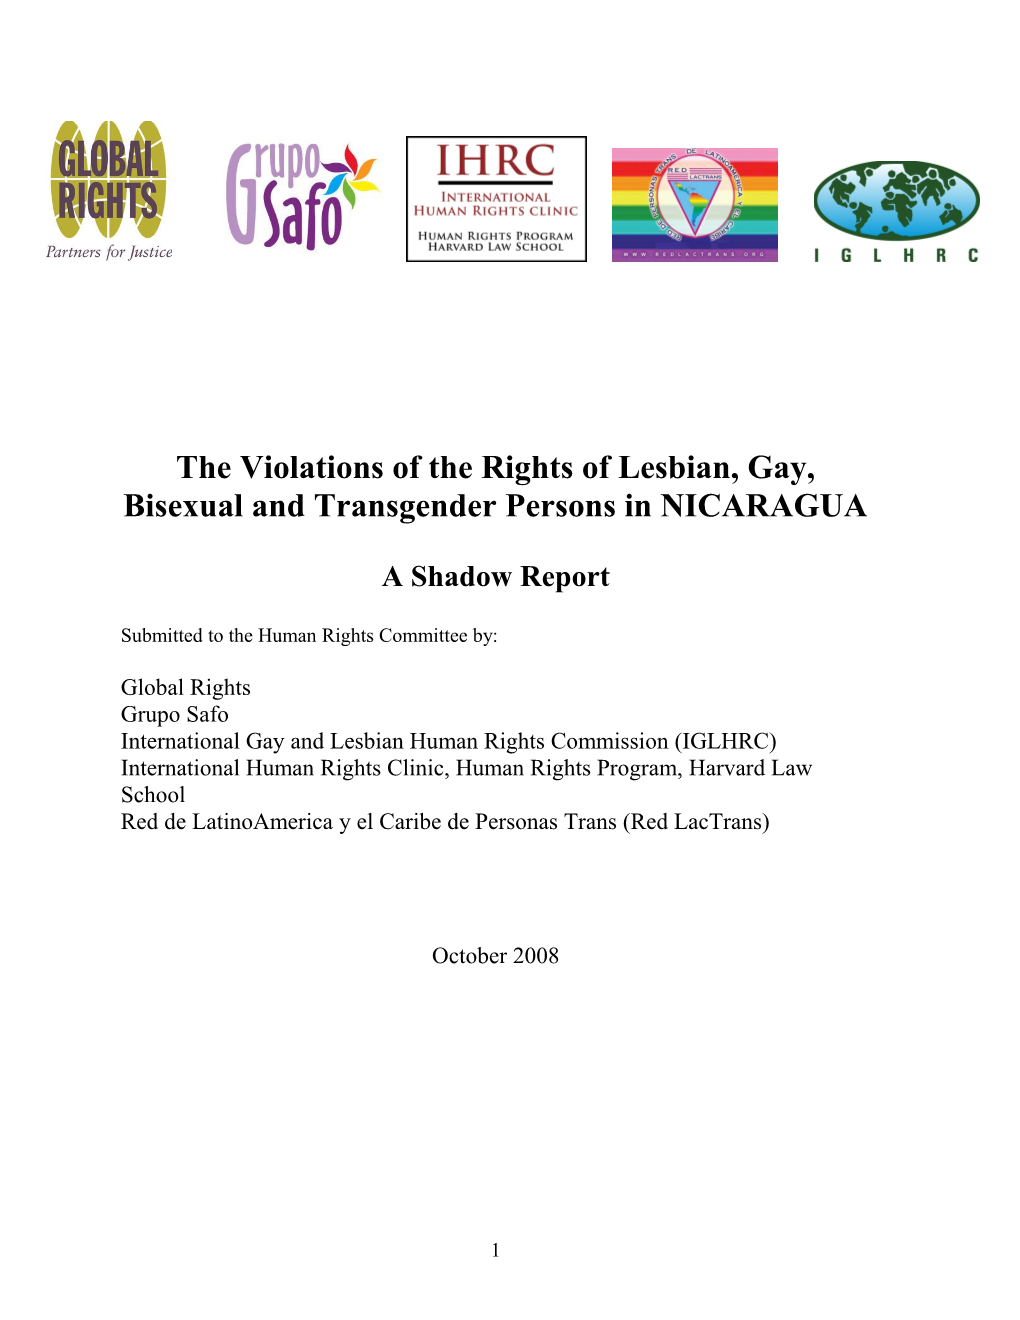 The Violations of the Rights of Lesbian, Gay, Bisexual and Transgender Persons in NICARAGUA